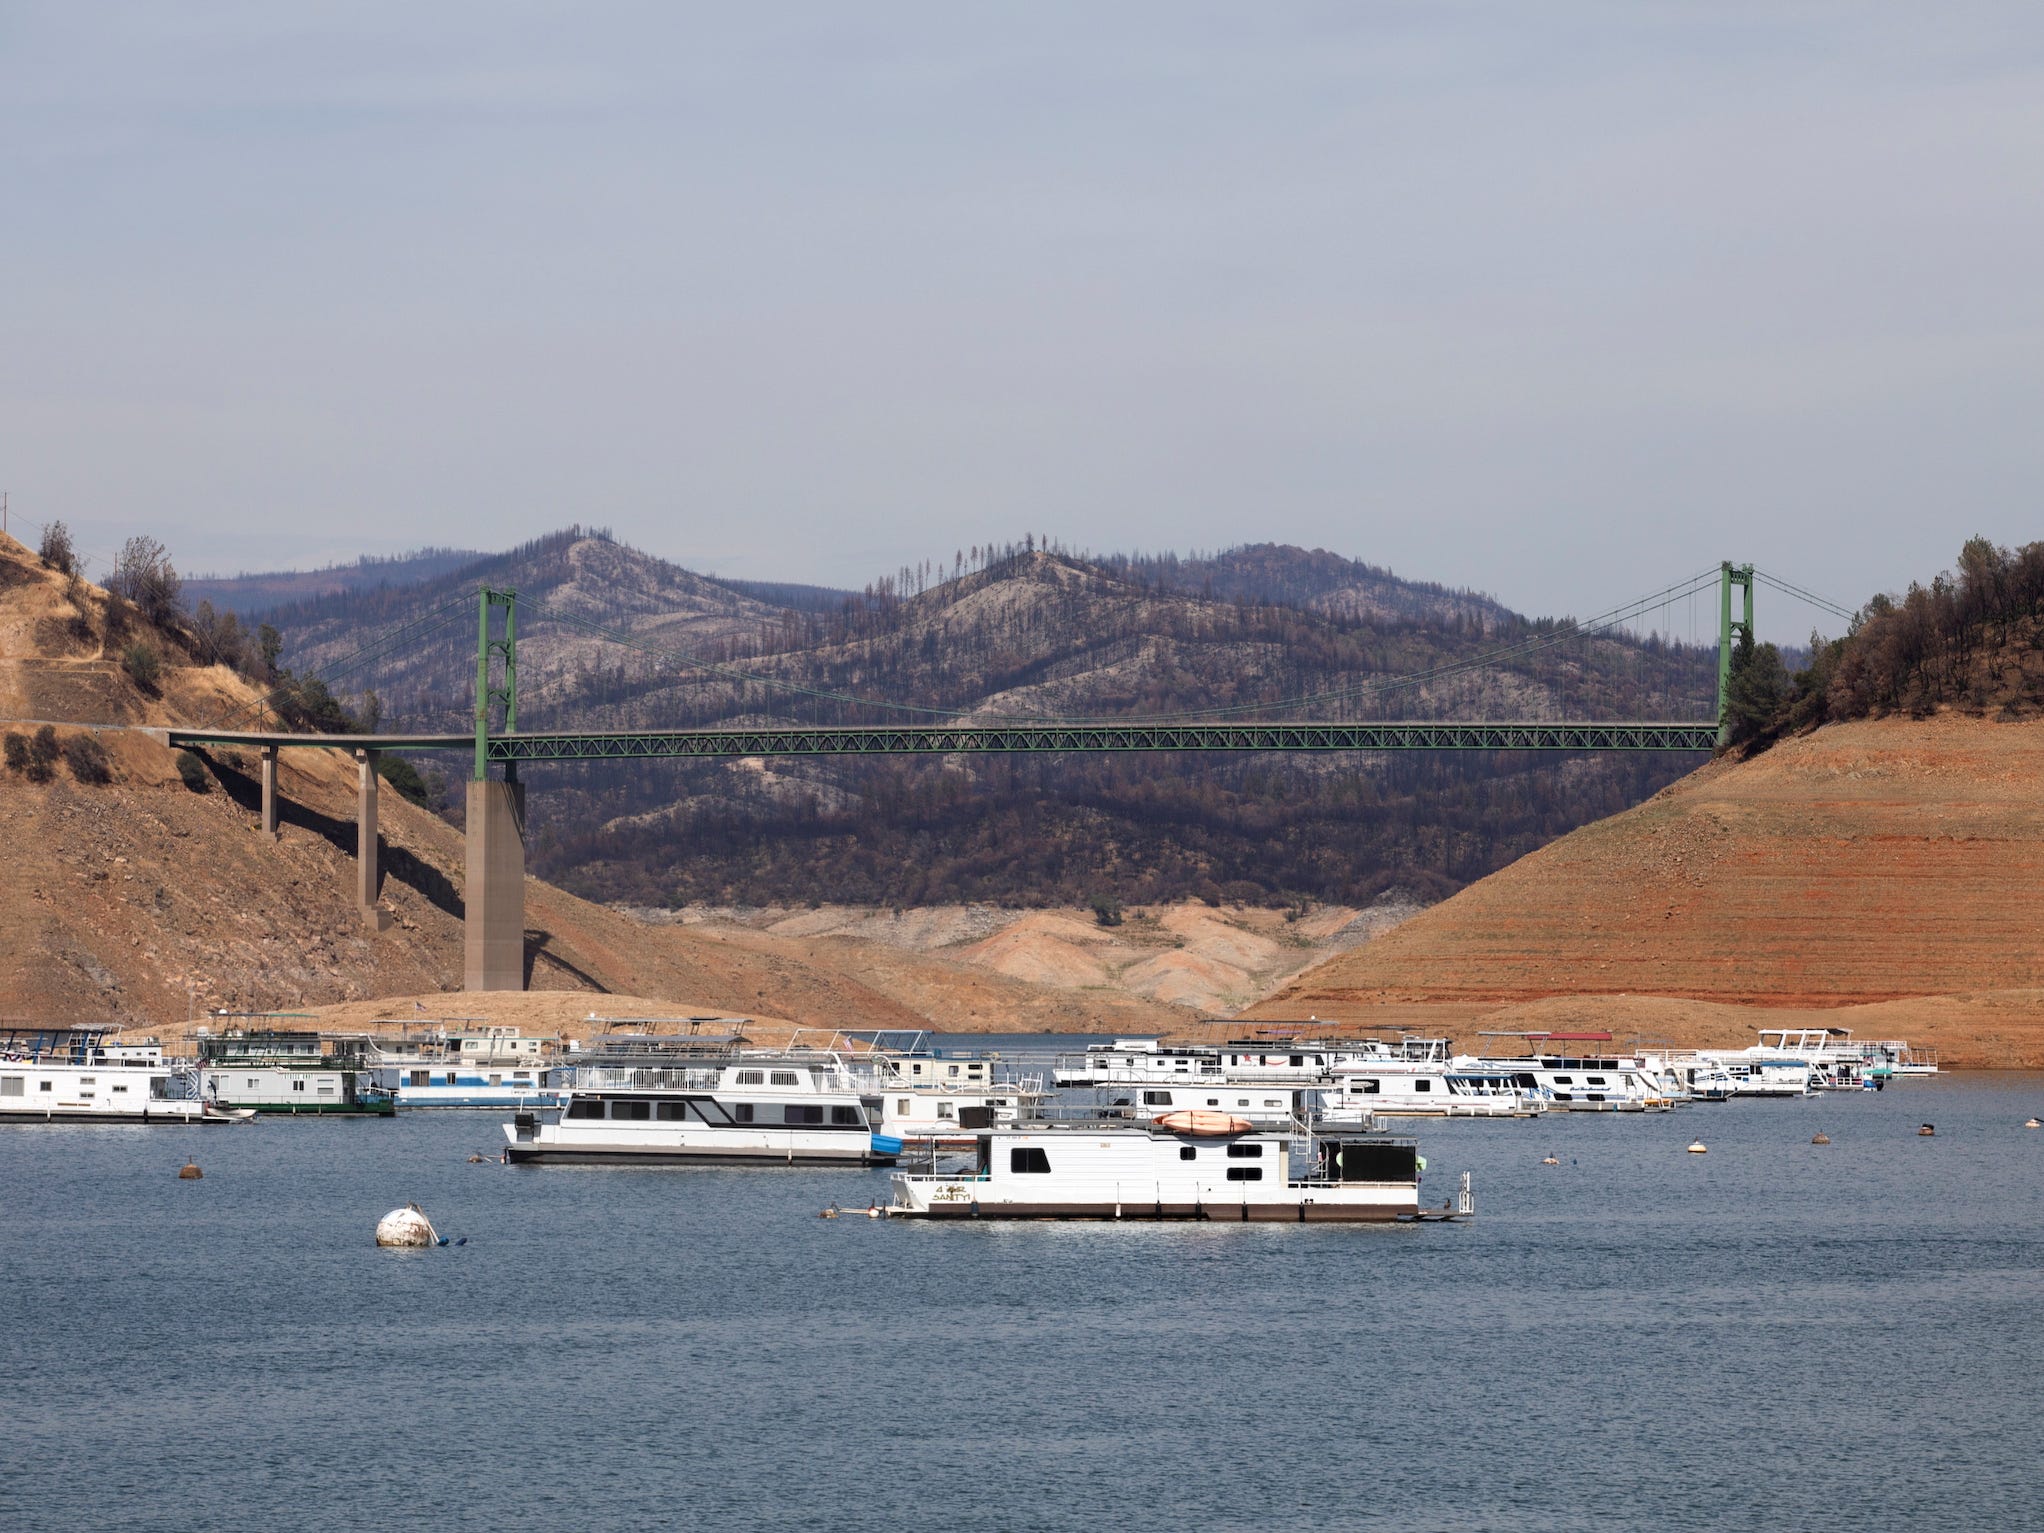 houseboats sit at low water levels in lake oroville below a bridge with exposed lake bottom